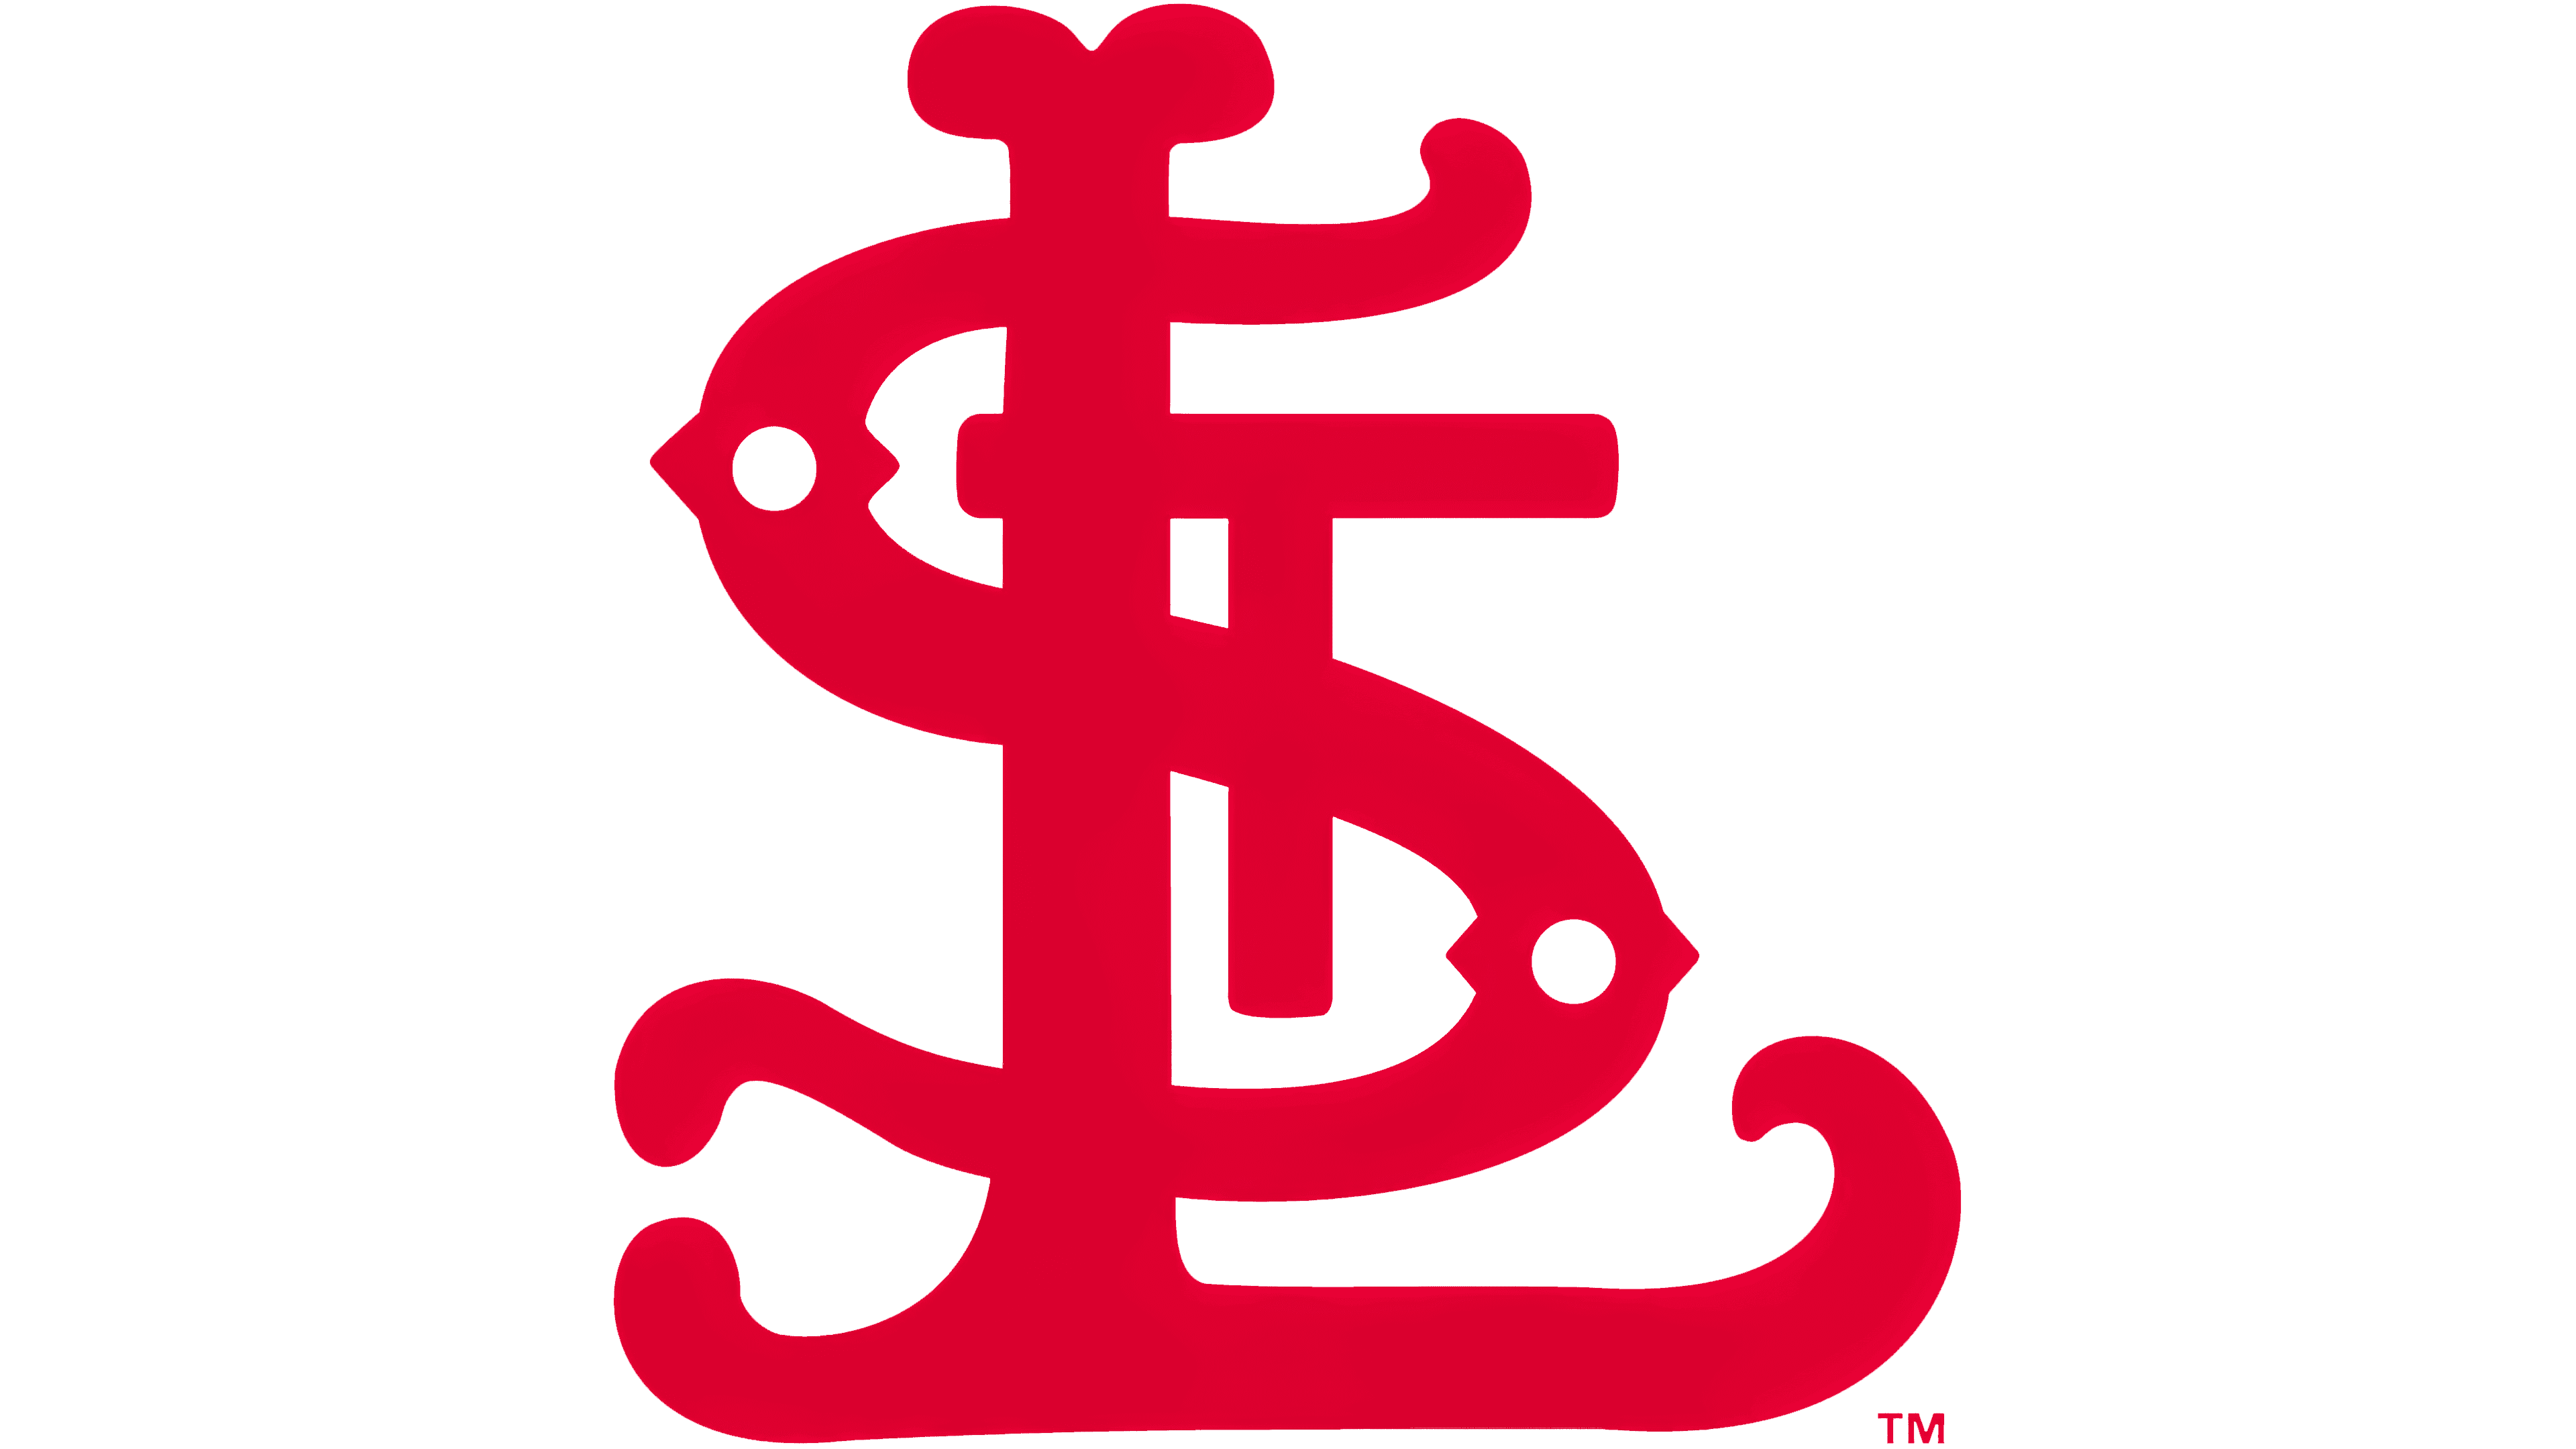 St. Louis Cardinals Logo , symbol, meaning, history, PNG, brand